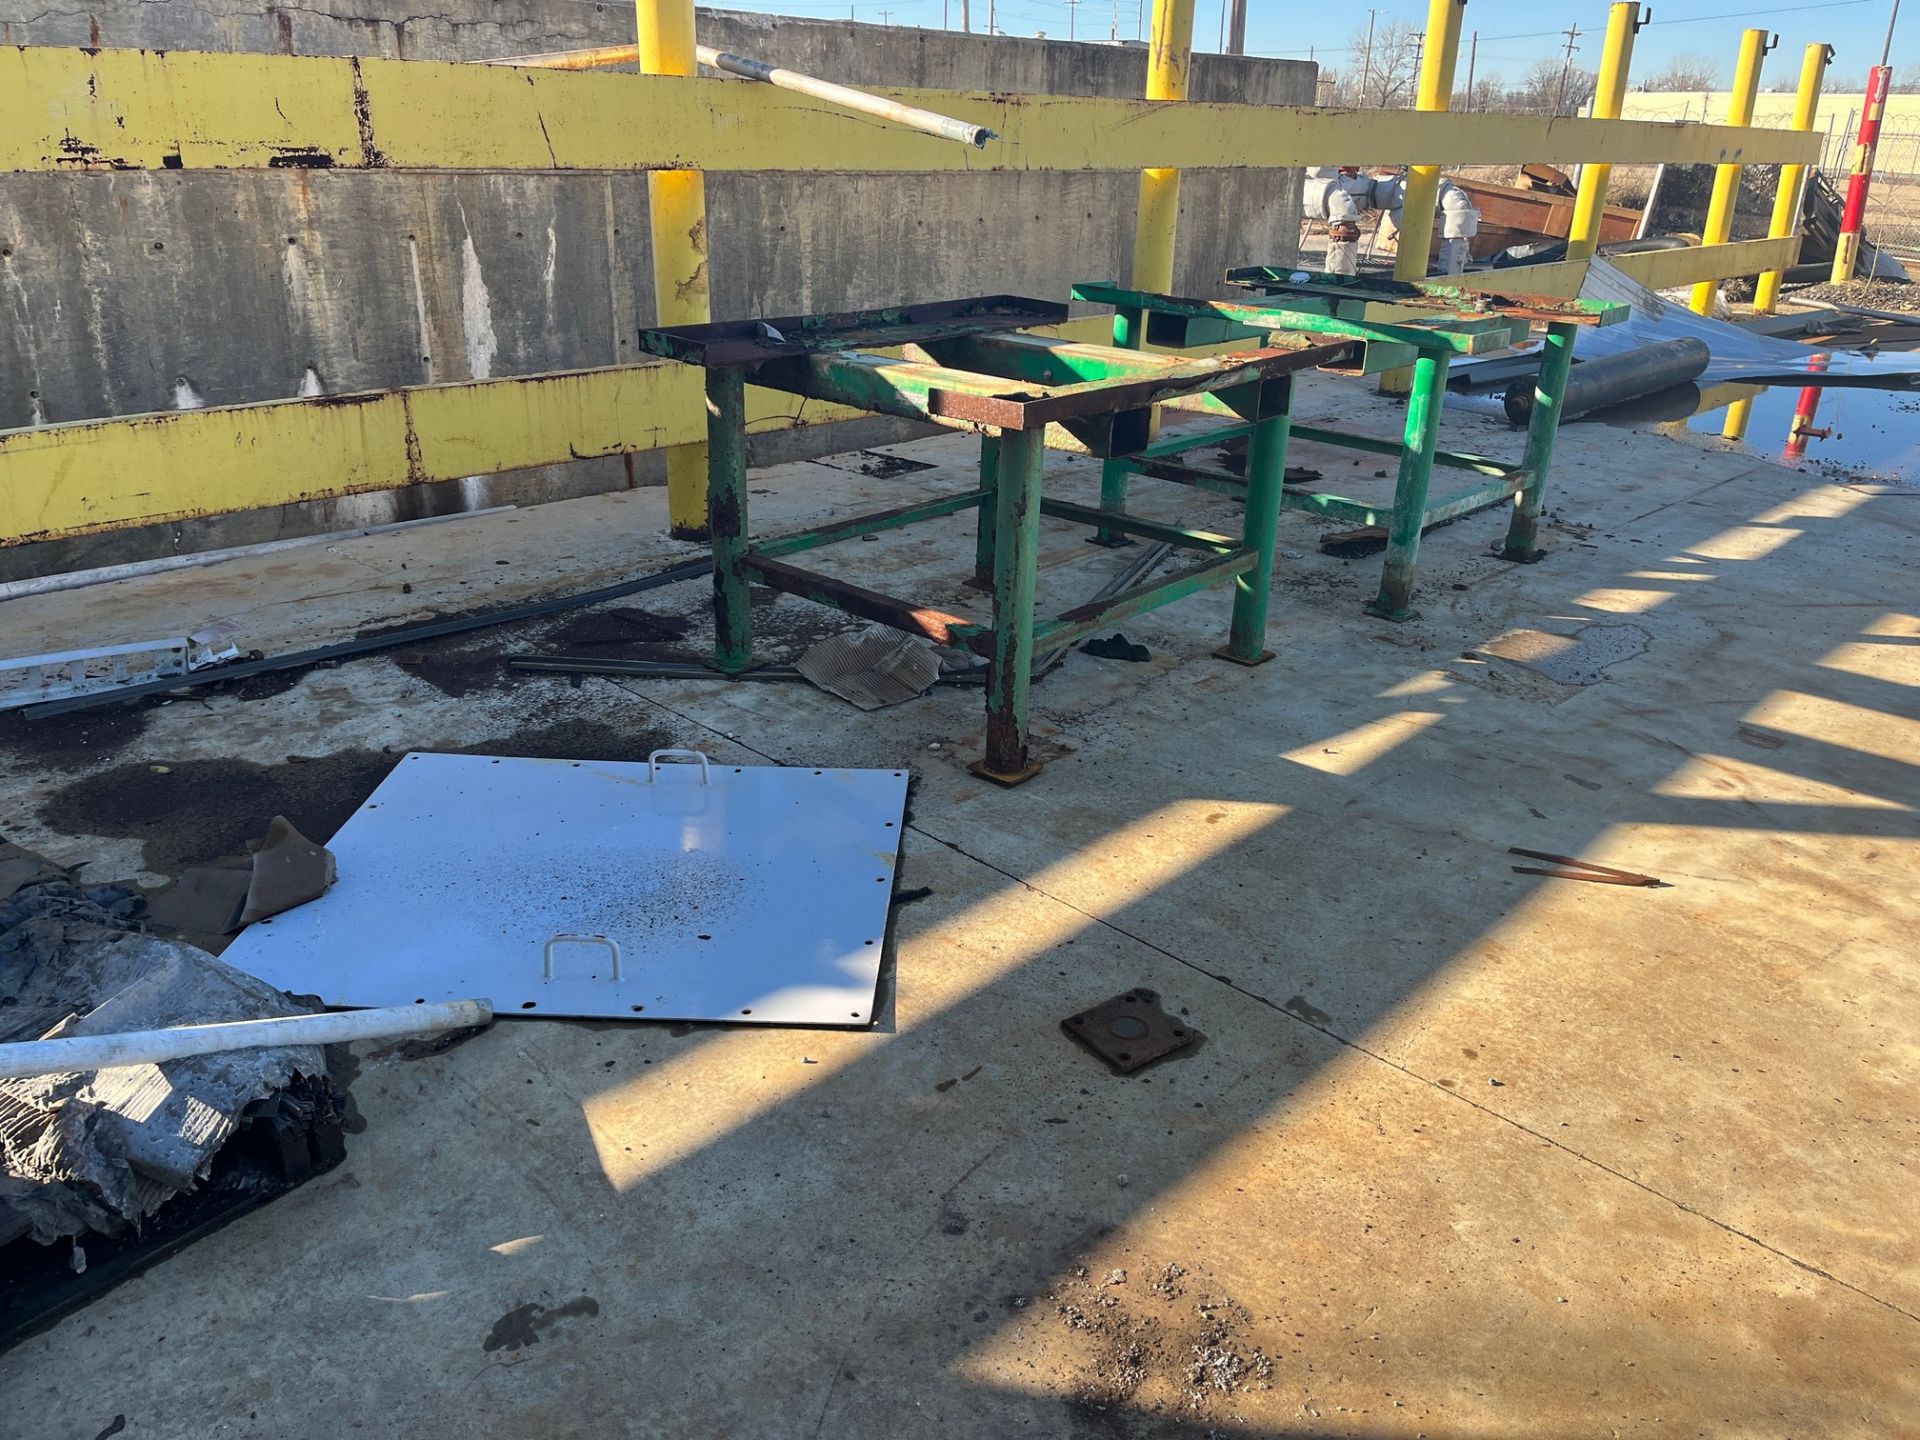 LOT OF FRAMES AND SCRAP ON INSIDE OF YELLOW FENCE (DEINKING BUILDING WEST CEMENT PLATFORM) - Image 2 of 4